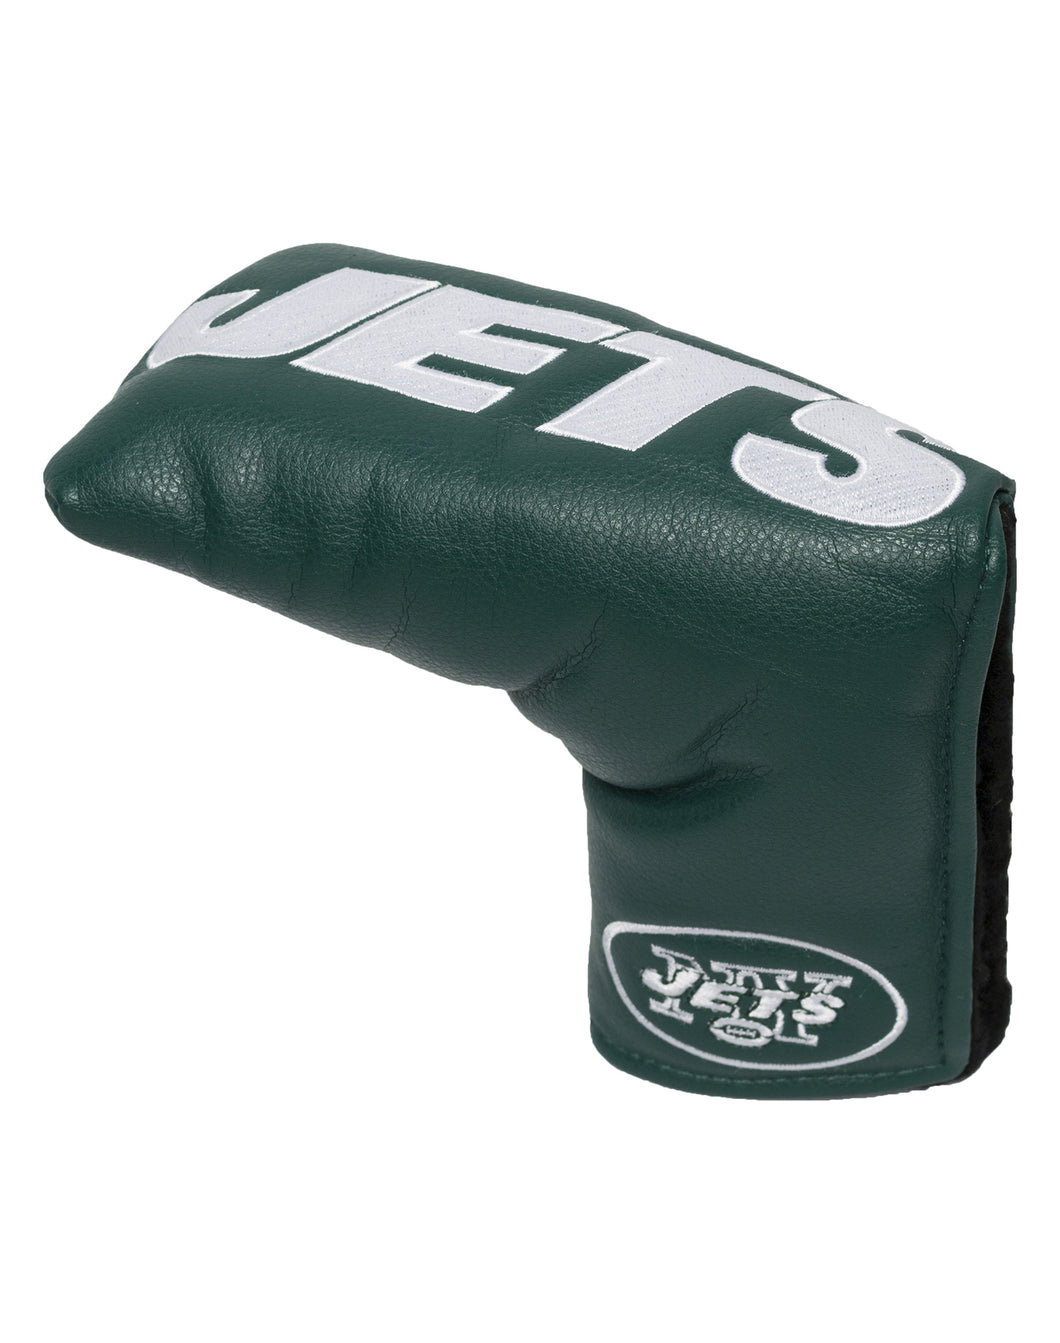 NFL Official Vintage Golf Blade Style Putter Headcover. New York Jets.